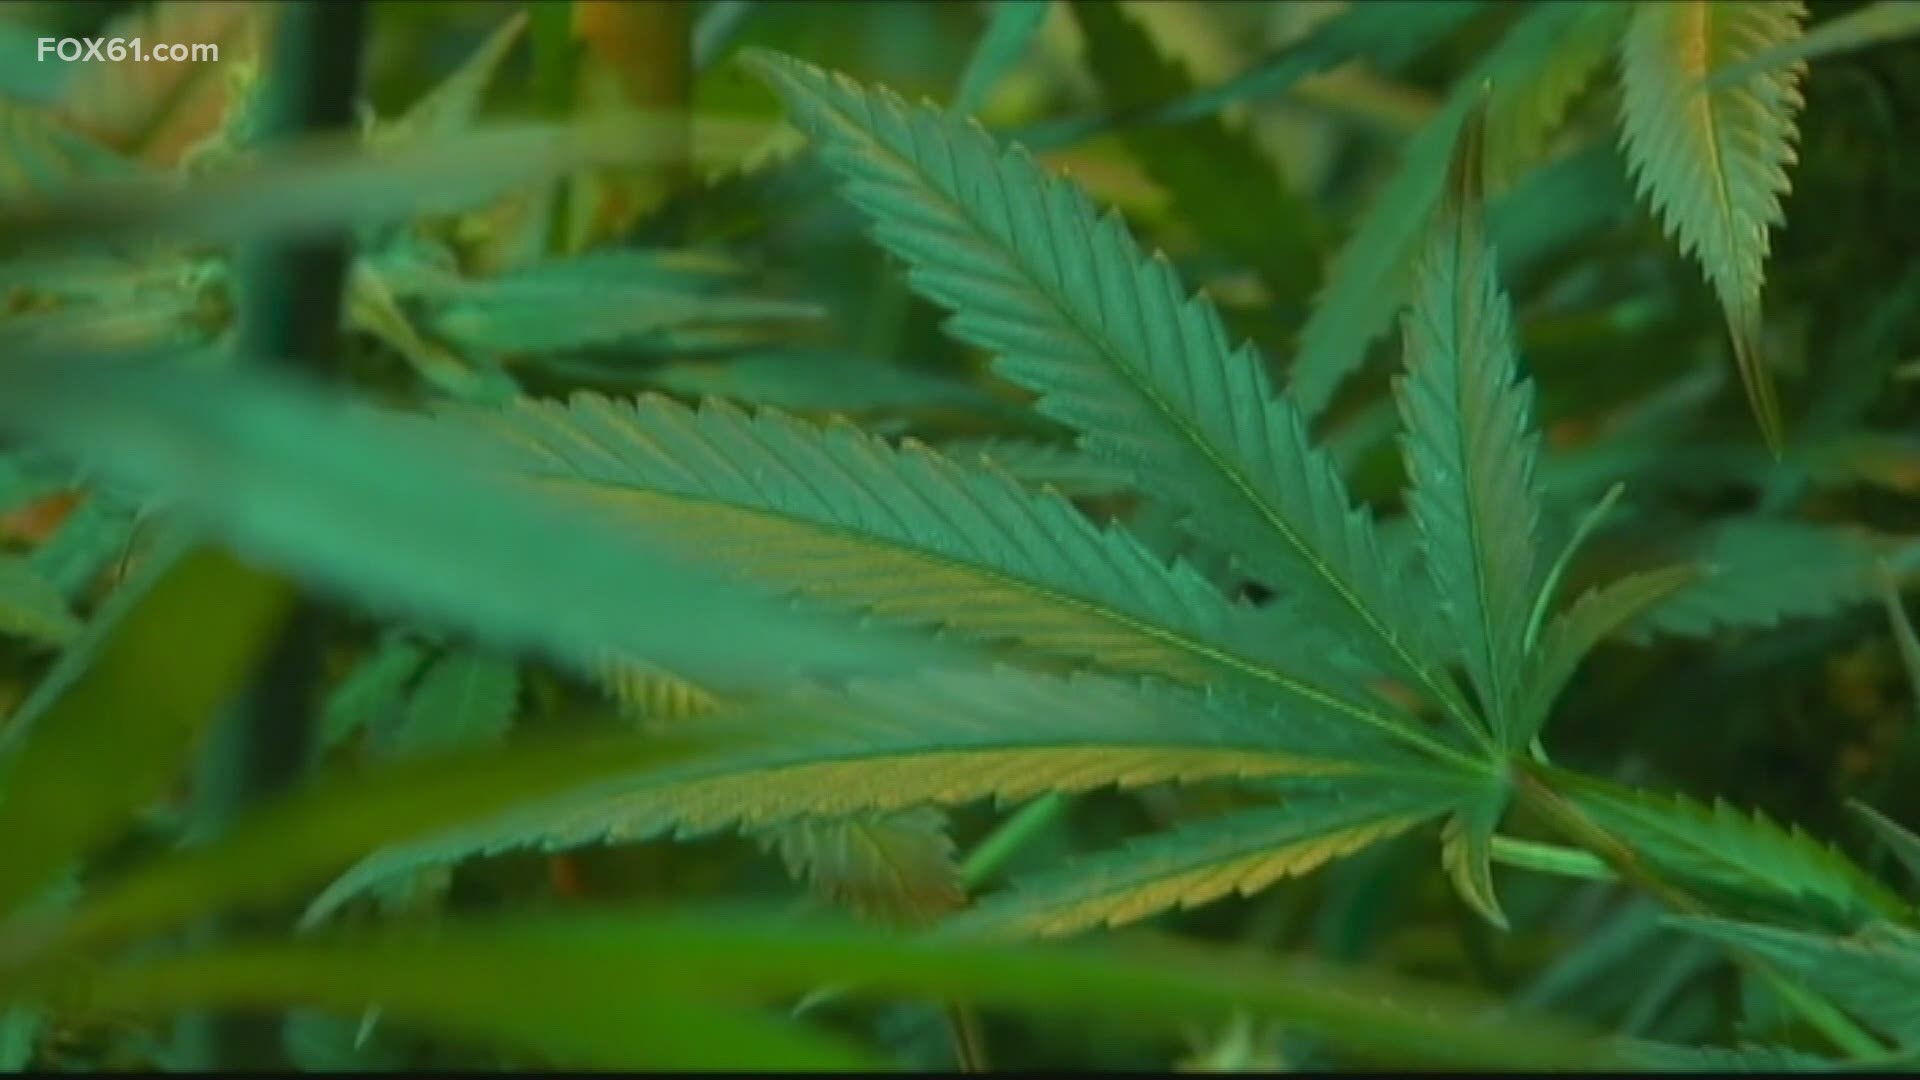 Senate Bill 888 focuses on legalizing and regulating the adult use of marijuana. Under this proposal, legal marijuana sales in the state could begin in mid-2022.